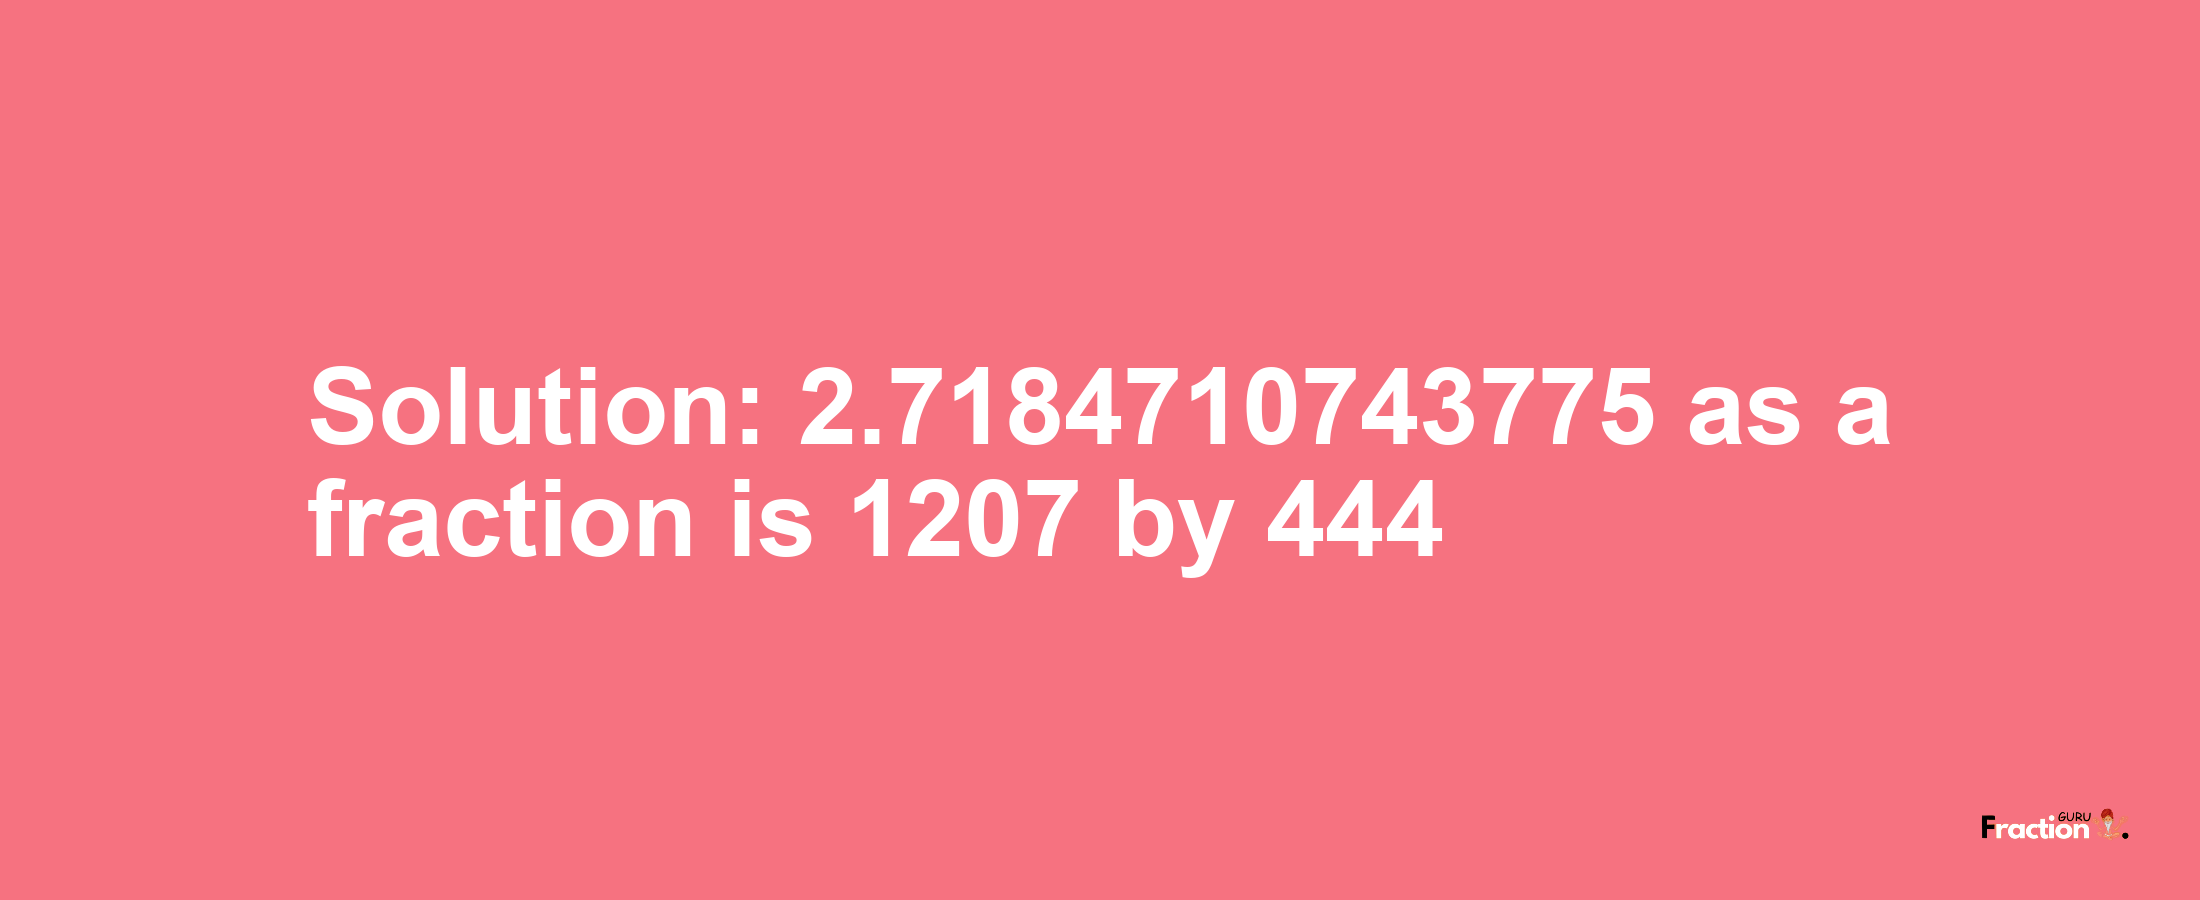 Solution:2.7184710743775 as a fraction is 1207/444